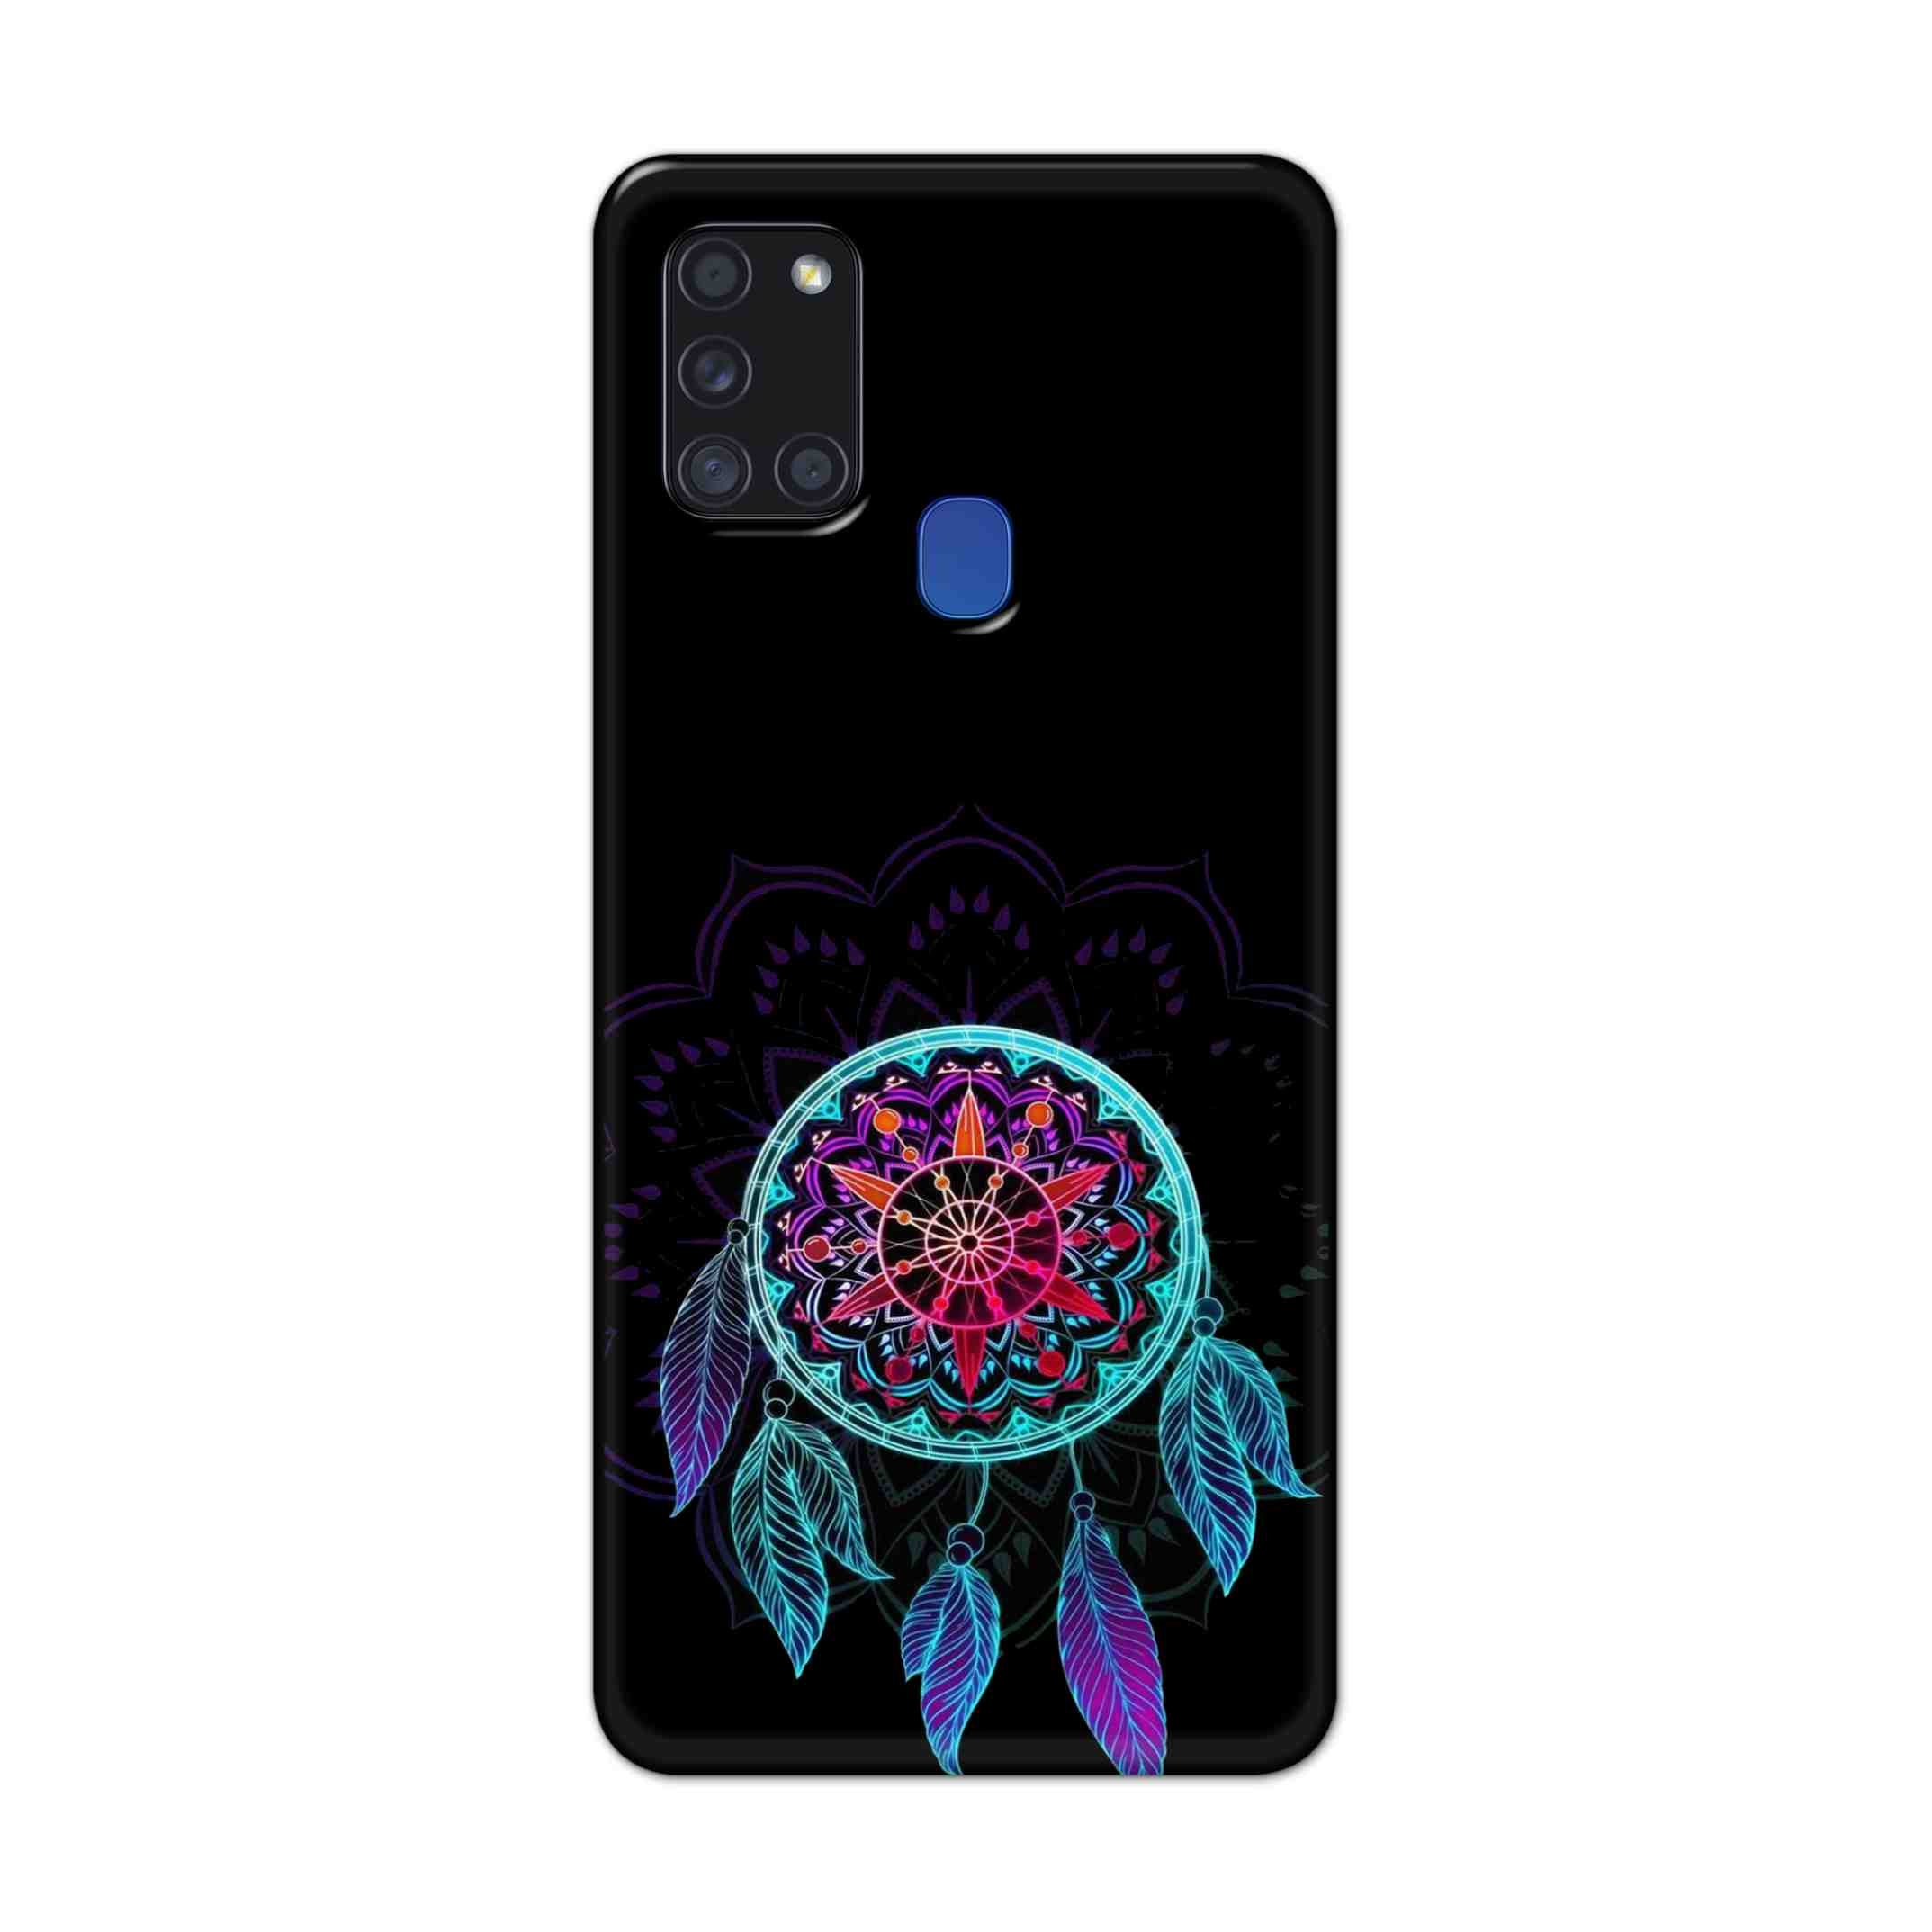 Buy Dream Catcher Hard Back Mobile Phone Case Cover For Samsung Galaxy A21s Online